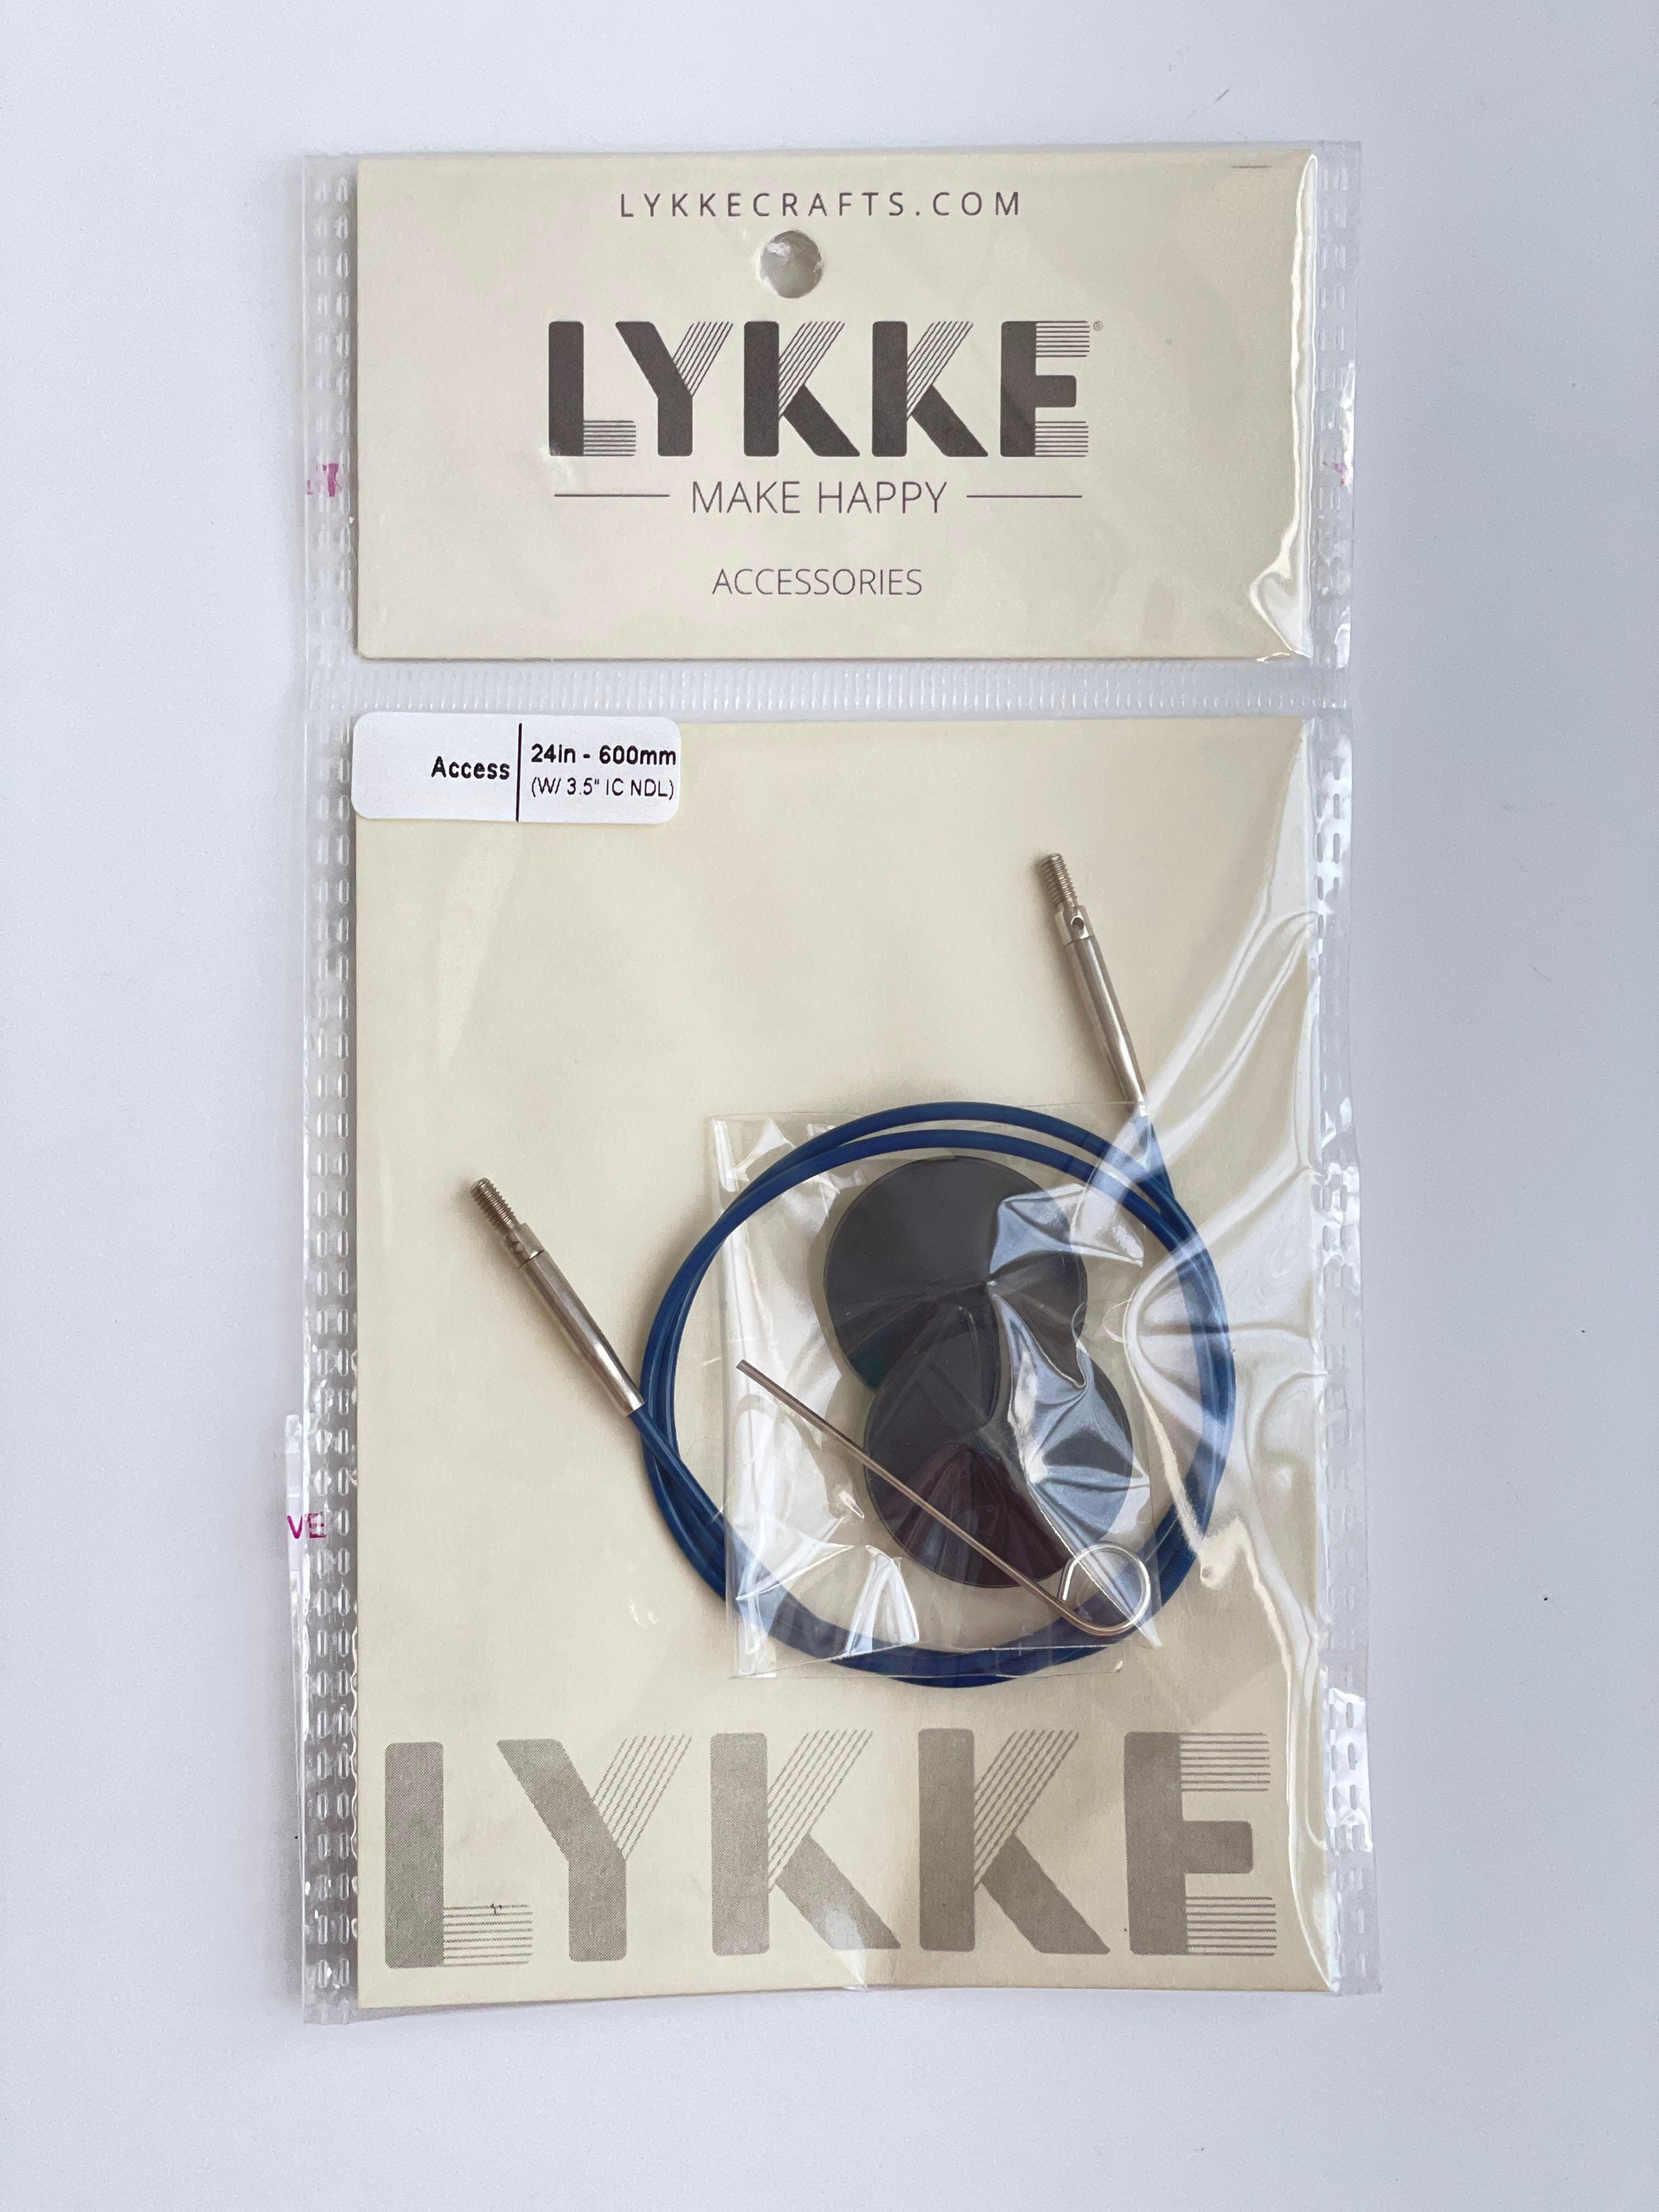 Lykke Blush Swivel Interchangeable Cord - 16 with 3.5 tips